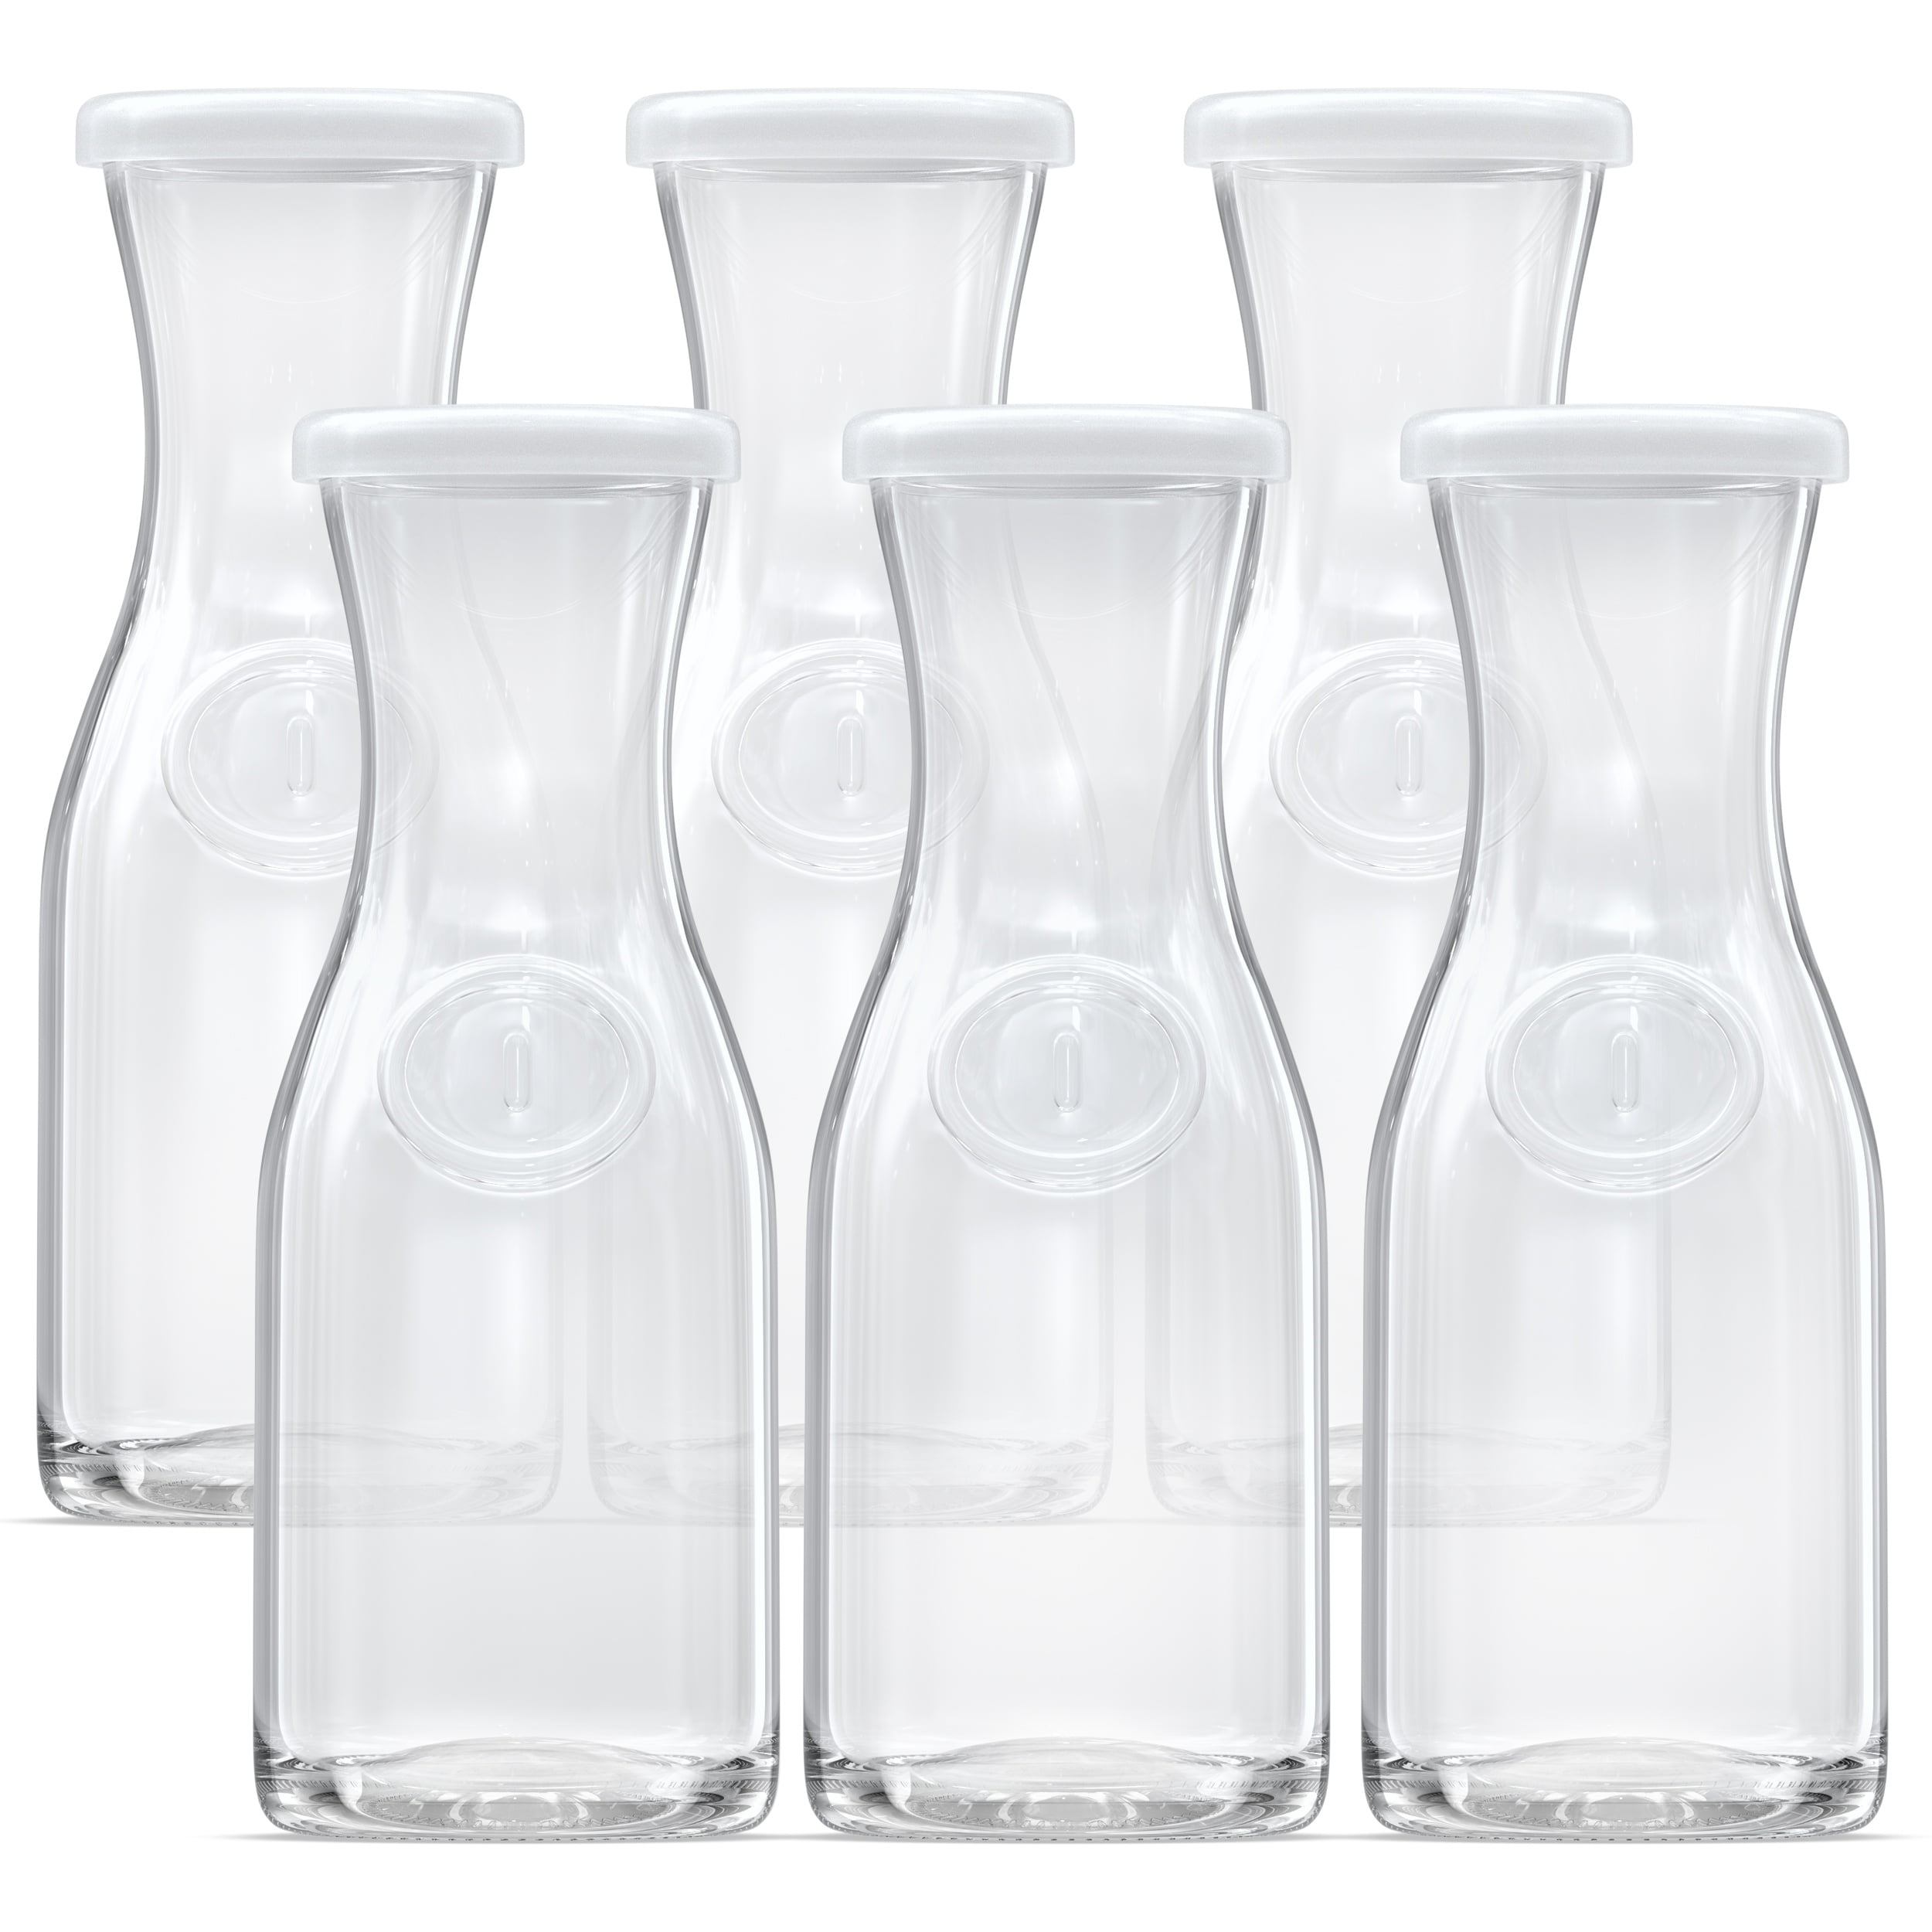 UMIEN Carafe Pitcher Clear Beverage Carafes with Flip Top Lid for Water,  Iced Tea, Mimosas, Laundry Detergent, Milk, Juice Easy Pour BPA Free Plastic  Drink Container, 50 Ounce (Round - 2 Pack) 